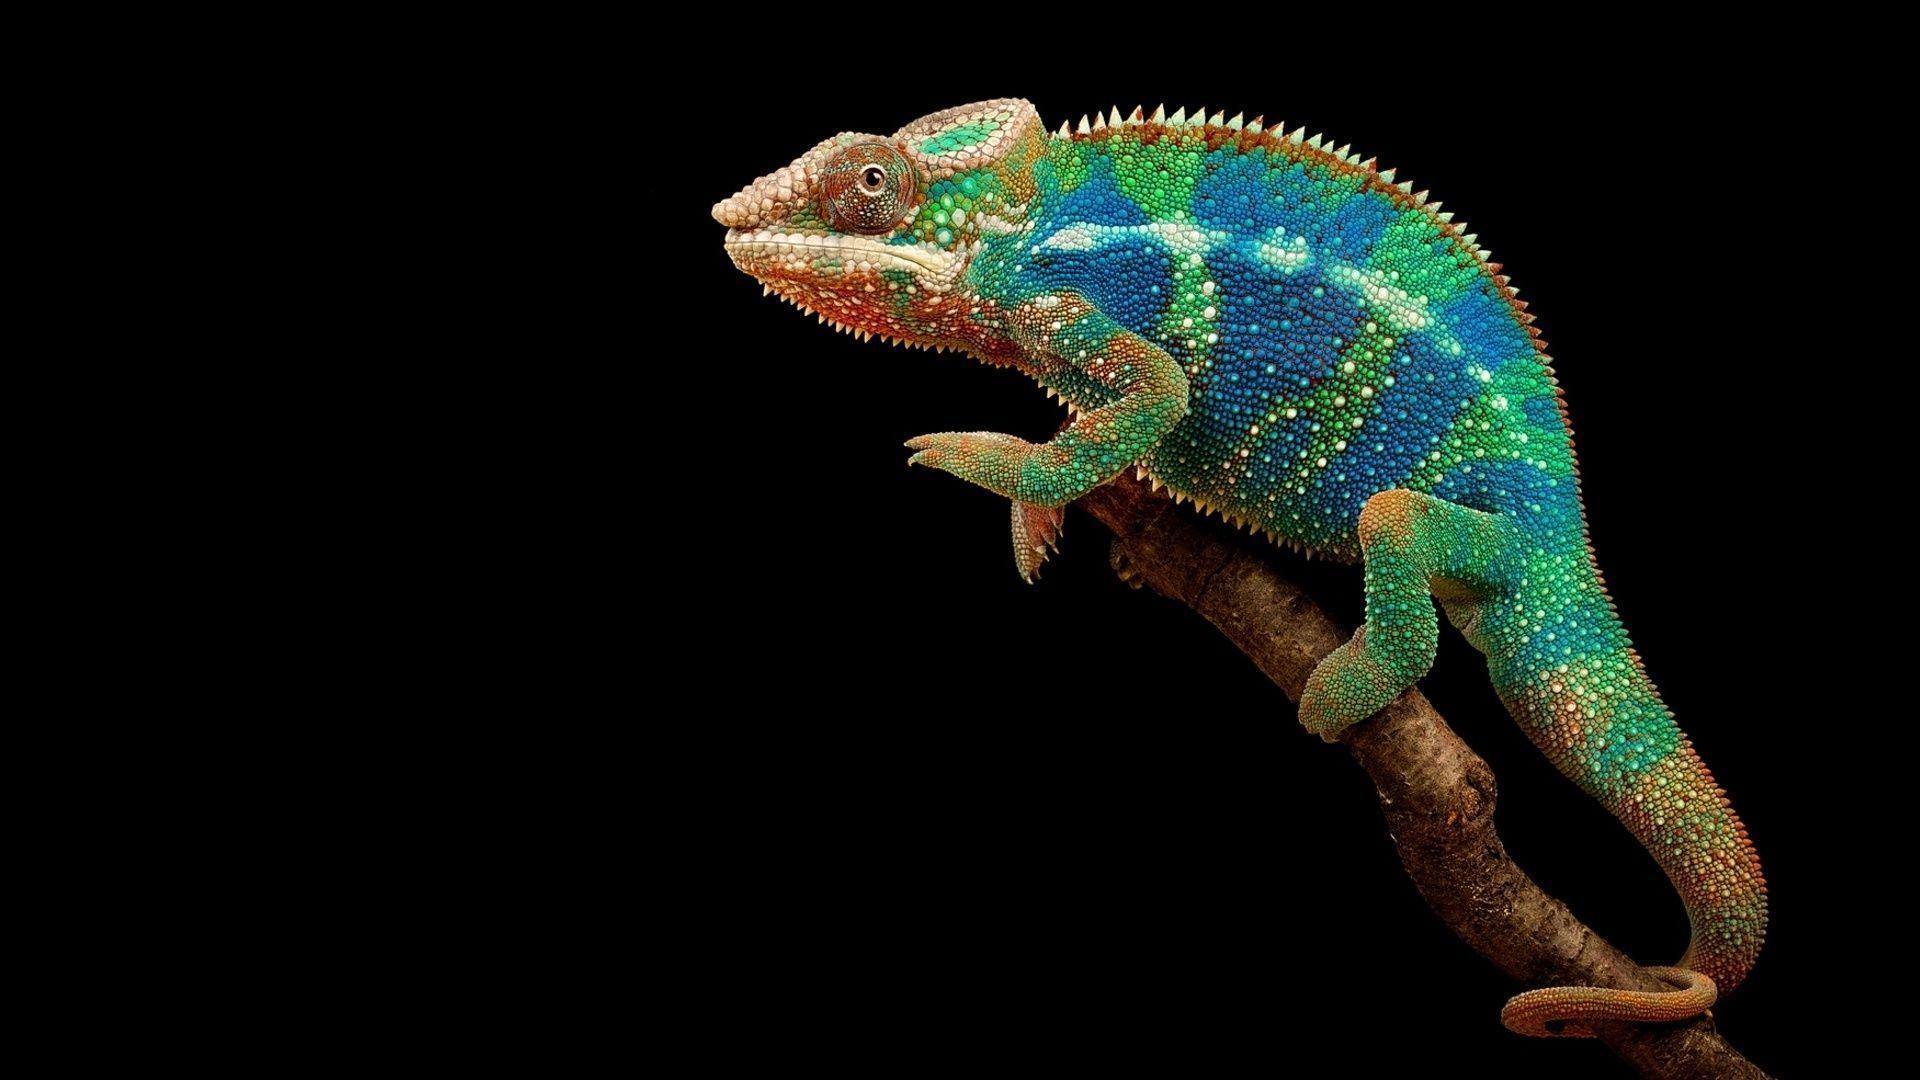 Download Colorful Chameleon Wallpaper 34527 1920x1080 px High